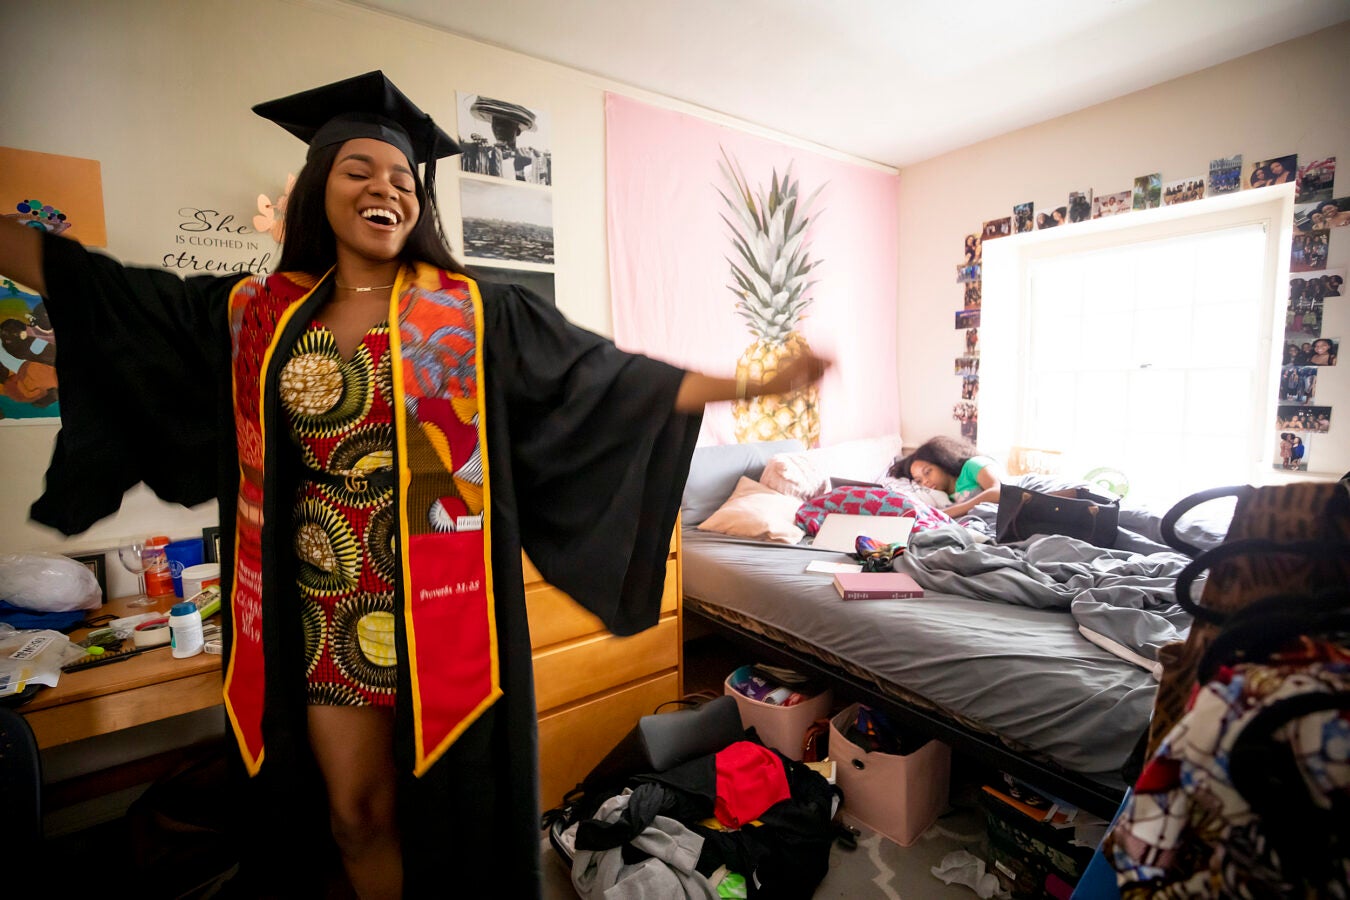 Angelica Chima dances in excitement in her Eliot House room before the ceremony while her visiting sister sleeps behind her.